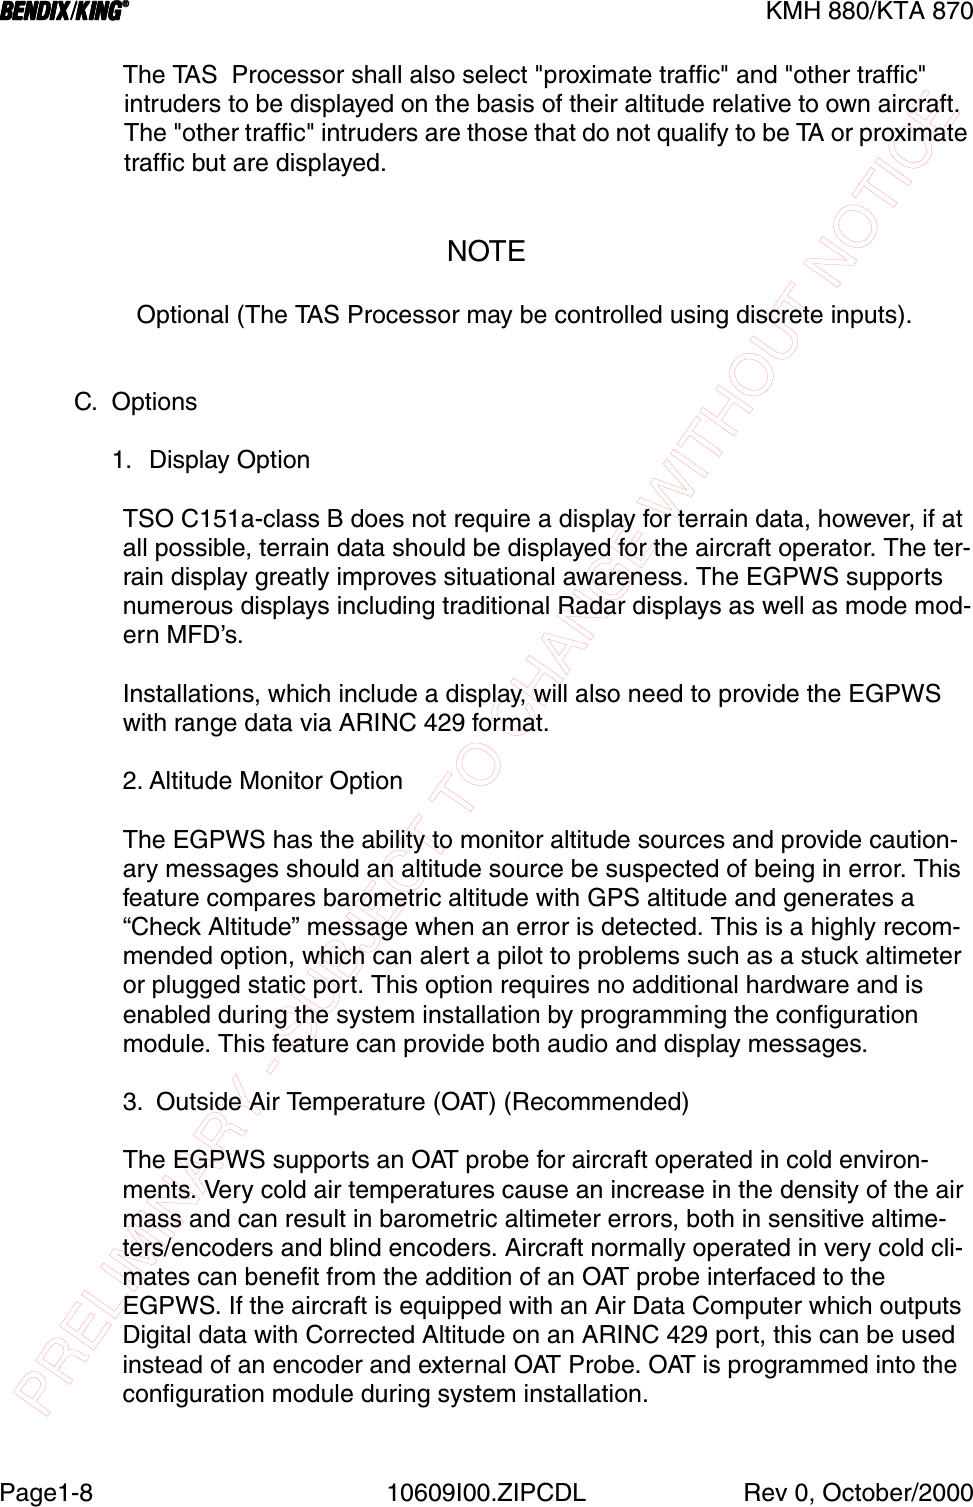 PRELIMINARY - SUBJECT TO CHANGE WITHOUT NOTICEBBBBKMH 880/KTA 870Page1-8 10609I00.ZIPCDL Rev 0, October/2000The TAS  Processor shall also select &quot;proximate traffic&quot; and &quot;other traffic&quot; intruders to be displayed on the basis of their altitude relative to own aircraft.  The &quot;other traffic&quot; intruders are those that do not qualify to be TA or proximate traffic but are displayed.NOTE  Optional (The TAS Processor may be controlled using discrete inputs).C. Options1. Display OptionTSO C151a-class B does not require a display for terrain data, however, if at all possible, terrain data should be displayed for the aircraft operator. The ter-rain display greatly improves situational awareness. The EGPWS supports numerous displays including traditional Radar displays as well as mode mod-ern MFD’s.Installations, which include a display, will also need to provide the EGPWS with range data via ARINC 429 format.2. Altitude Monitor OptionThe EGPWS has the ability to monitor altitude sources and provide caution-ary messages should an altitude source be suspected of being in error. This feature compares barometric altitude with GPS altitude and generates a “Check Altitude” message when an error is detected. This is a highly recom-mended option, which can alert a pilot to problems such as a stuck altimeter or plugged static port. This option requires no additional hardware and is enabled during the system installation by programming the configuration module. This feature can provide both audio and display messages.3.  Outside Air Temperature (OAT) (Recommended)The EGPWS supports an OAT probe for aircraft operated in cold environ-ments. Very cold air temperatures cause an increase in the density of the air mass and can result in barometric altimeter errors, both in sensitive altime-ters/encoders and blind encoders. Aircraft normally operated in very cold cli-mates can benefit from the addition of an OAT probe interfaced to the EGPWS. If the aircraft is equipped with an Air Data Computer which outputs Digital data with Corrected Altitude on an ARINC 429 port, this can be used instead of an encoder and external OAT Probe. OAT is programmed into the configuration module during system installation.